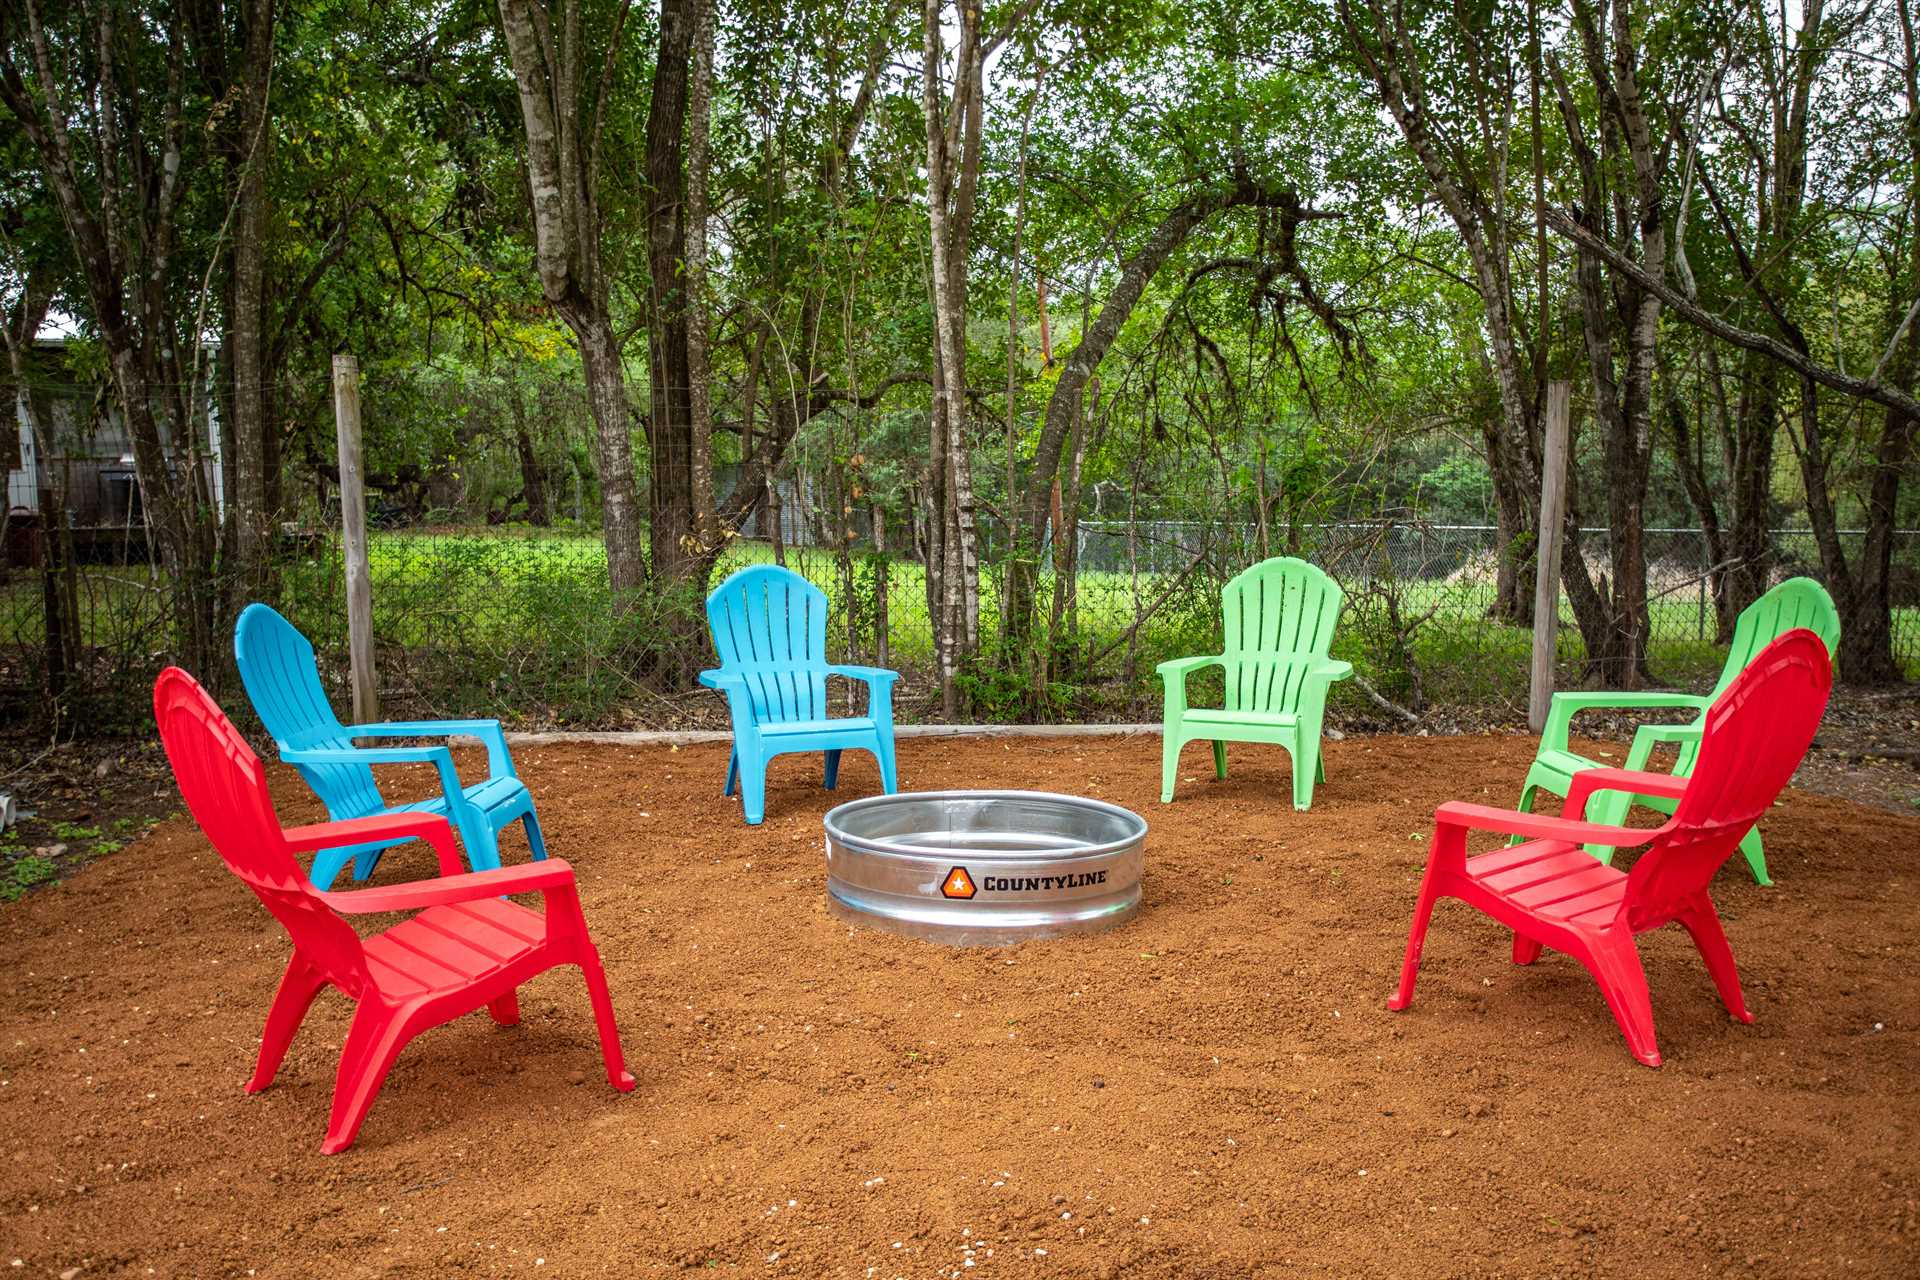                                                 Relax, admire the local wildlife, stargaze, and enjoy good company around the fire pit! There's even more outdoor seating around the picnic table nearby.